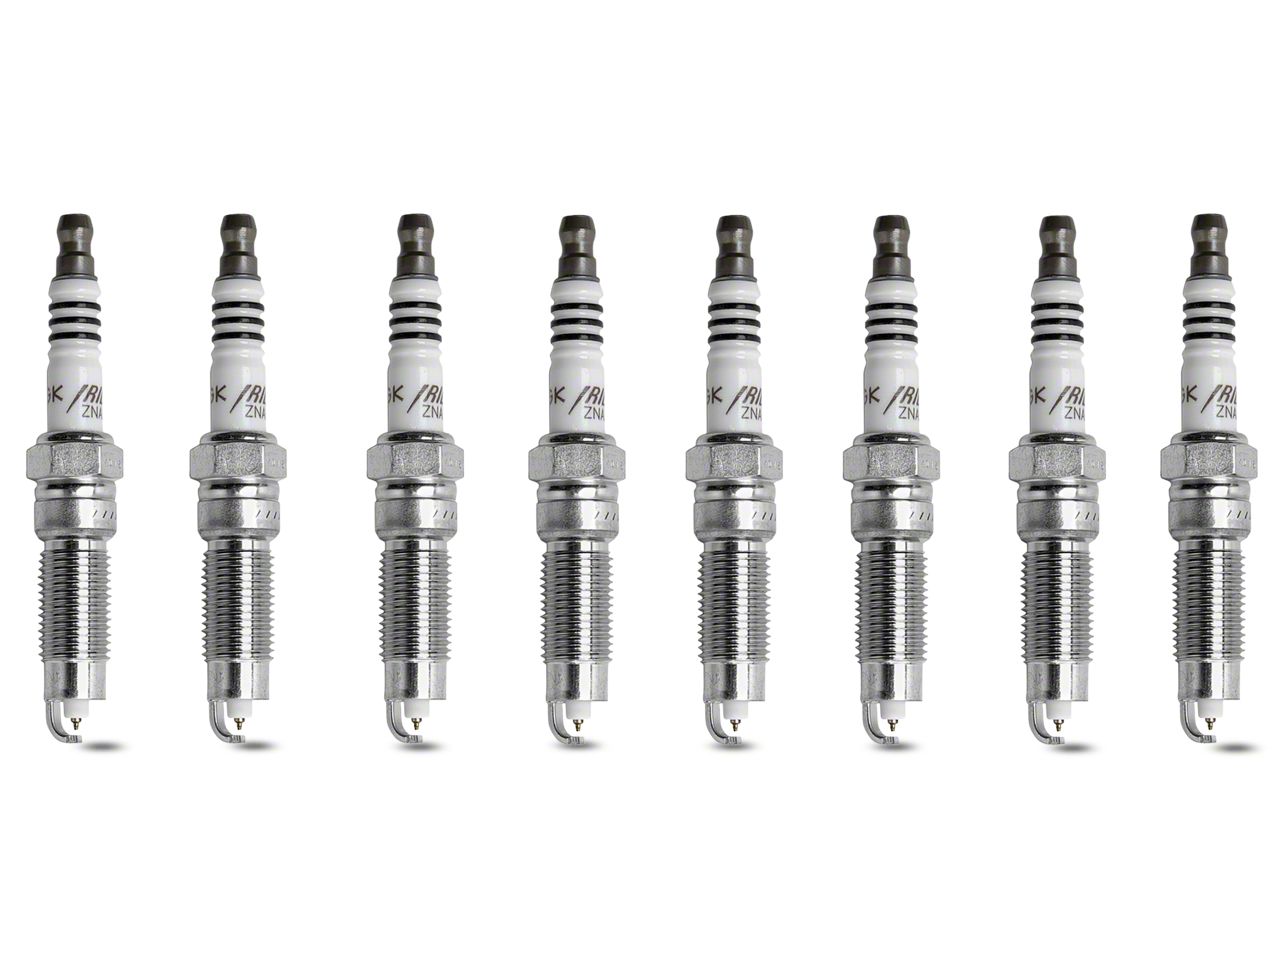 Mustang Spark Plugs & Spark Plug Wires